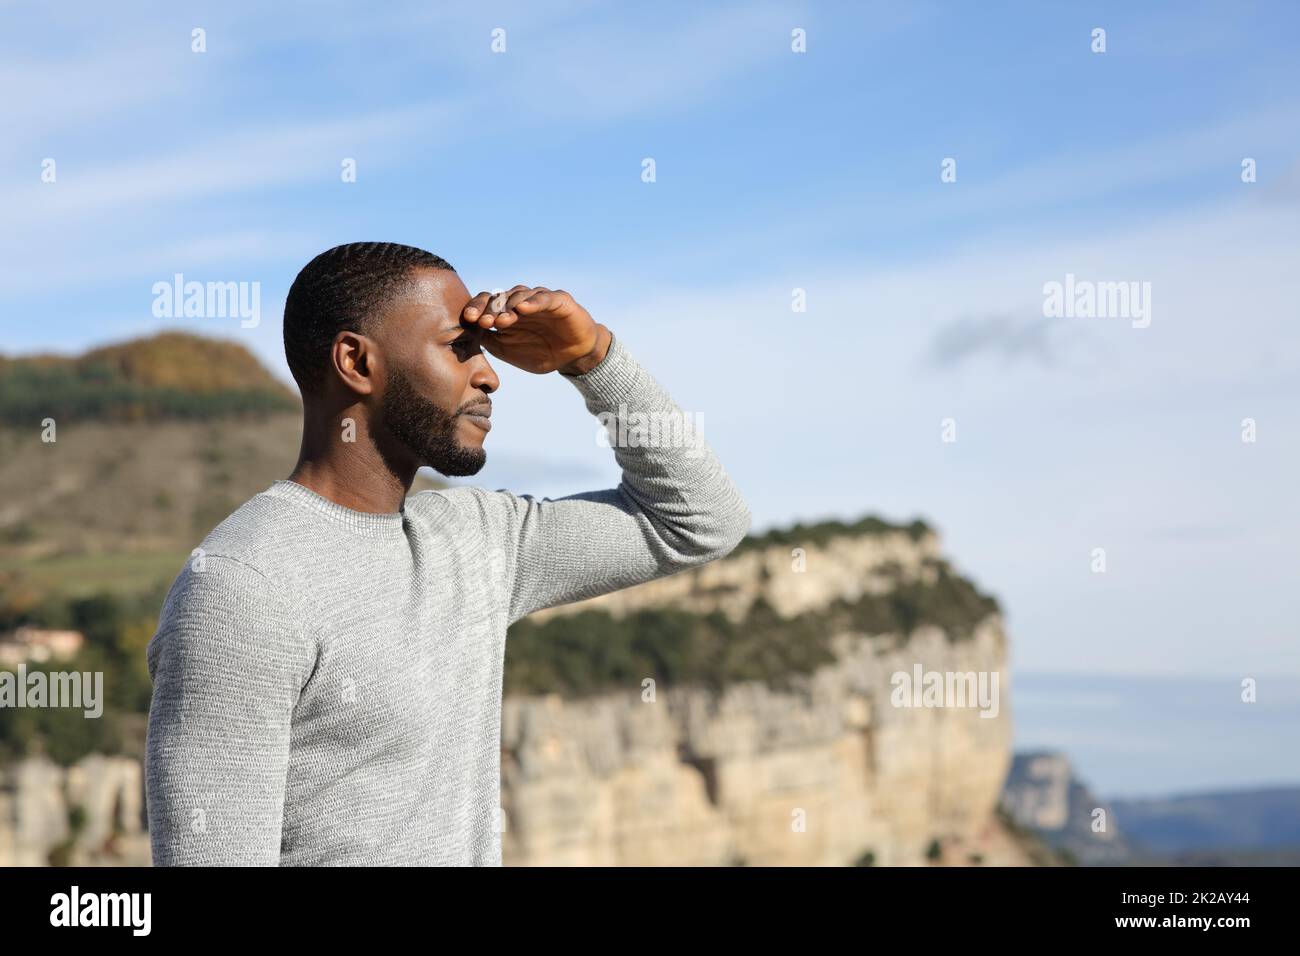 Man with black skin contemplating with hand on forehead Stock Photo